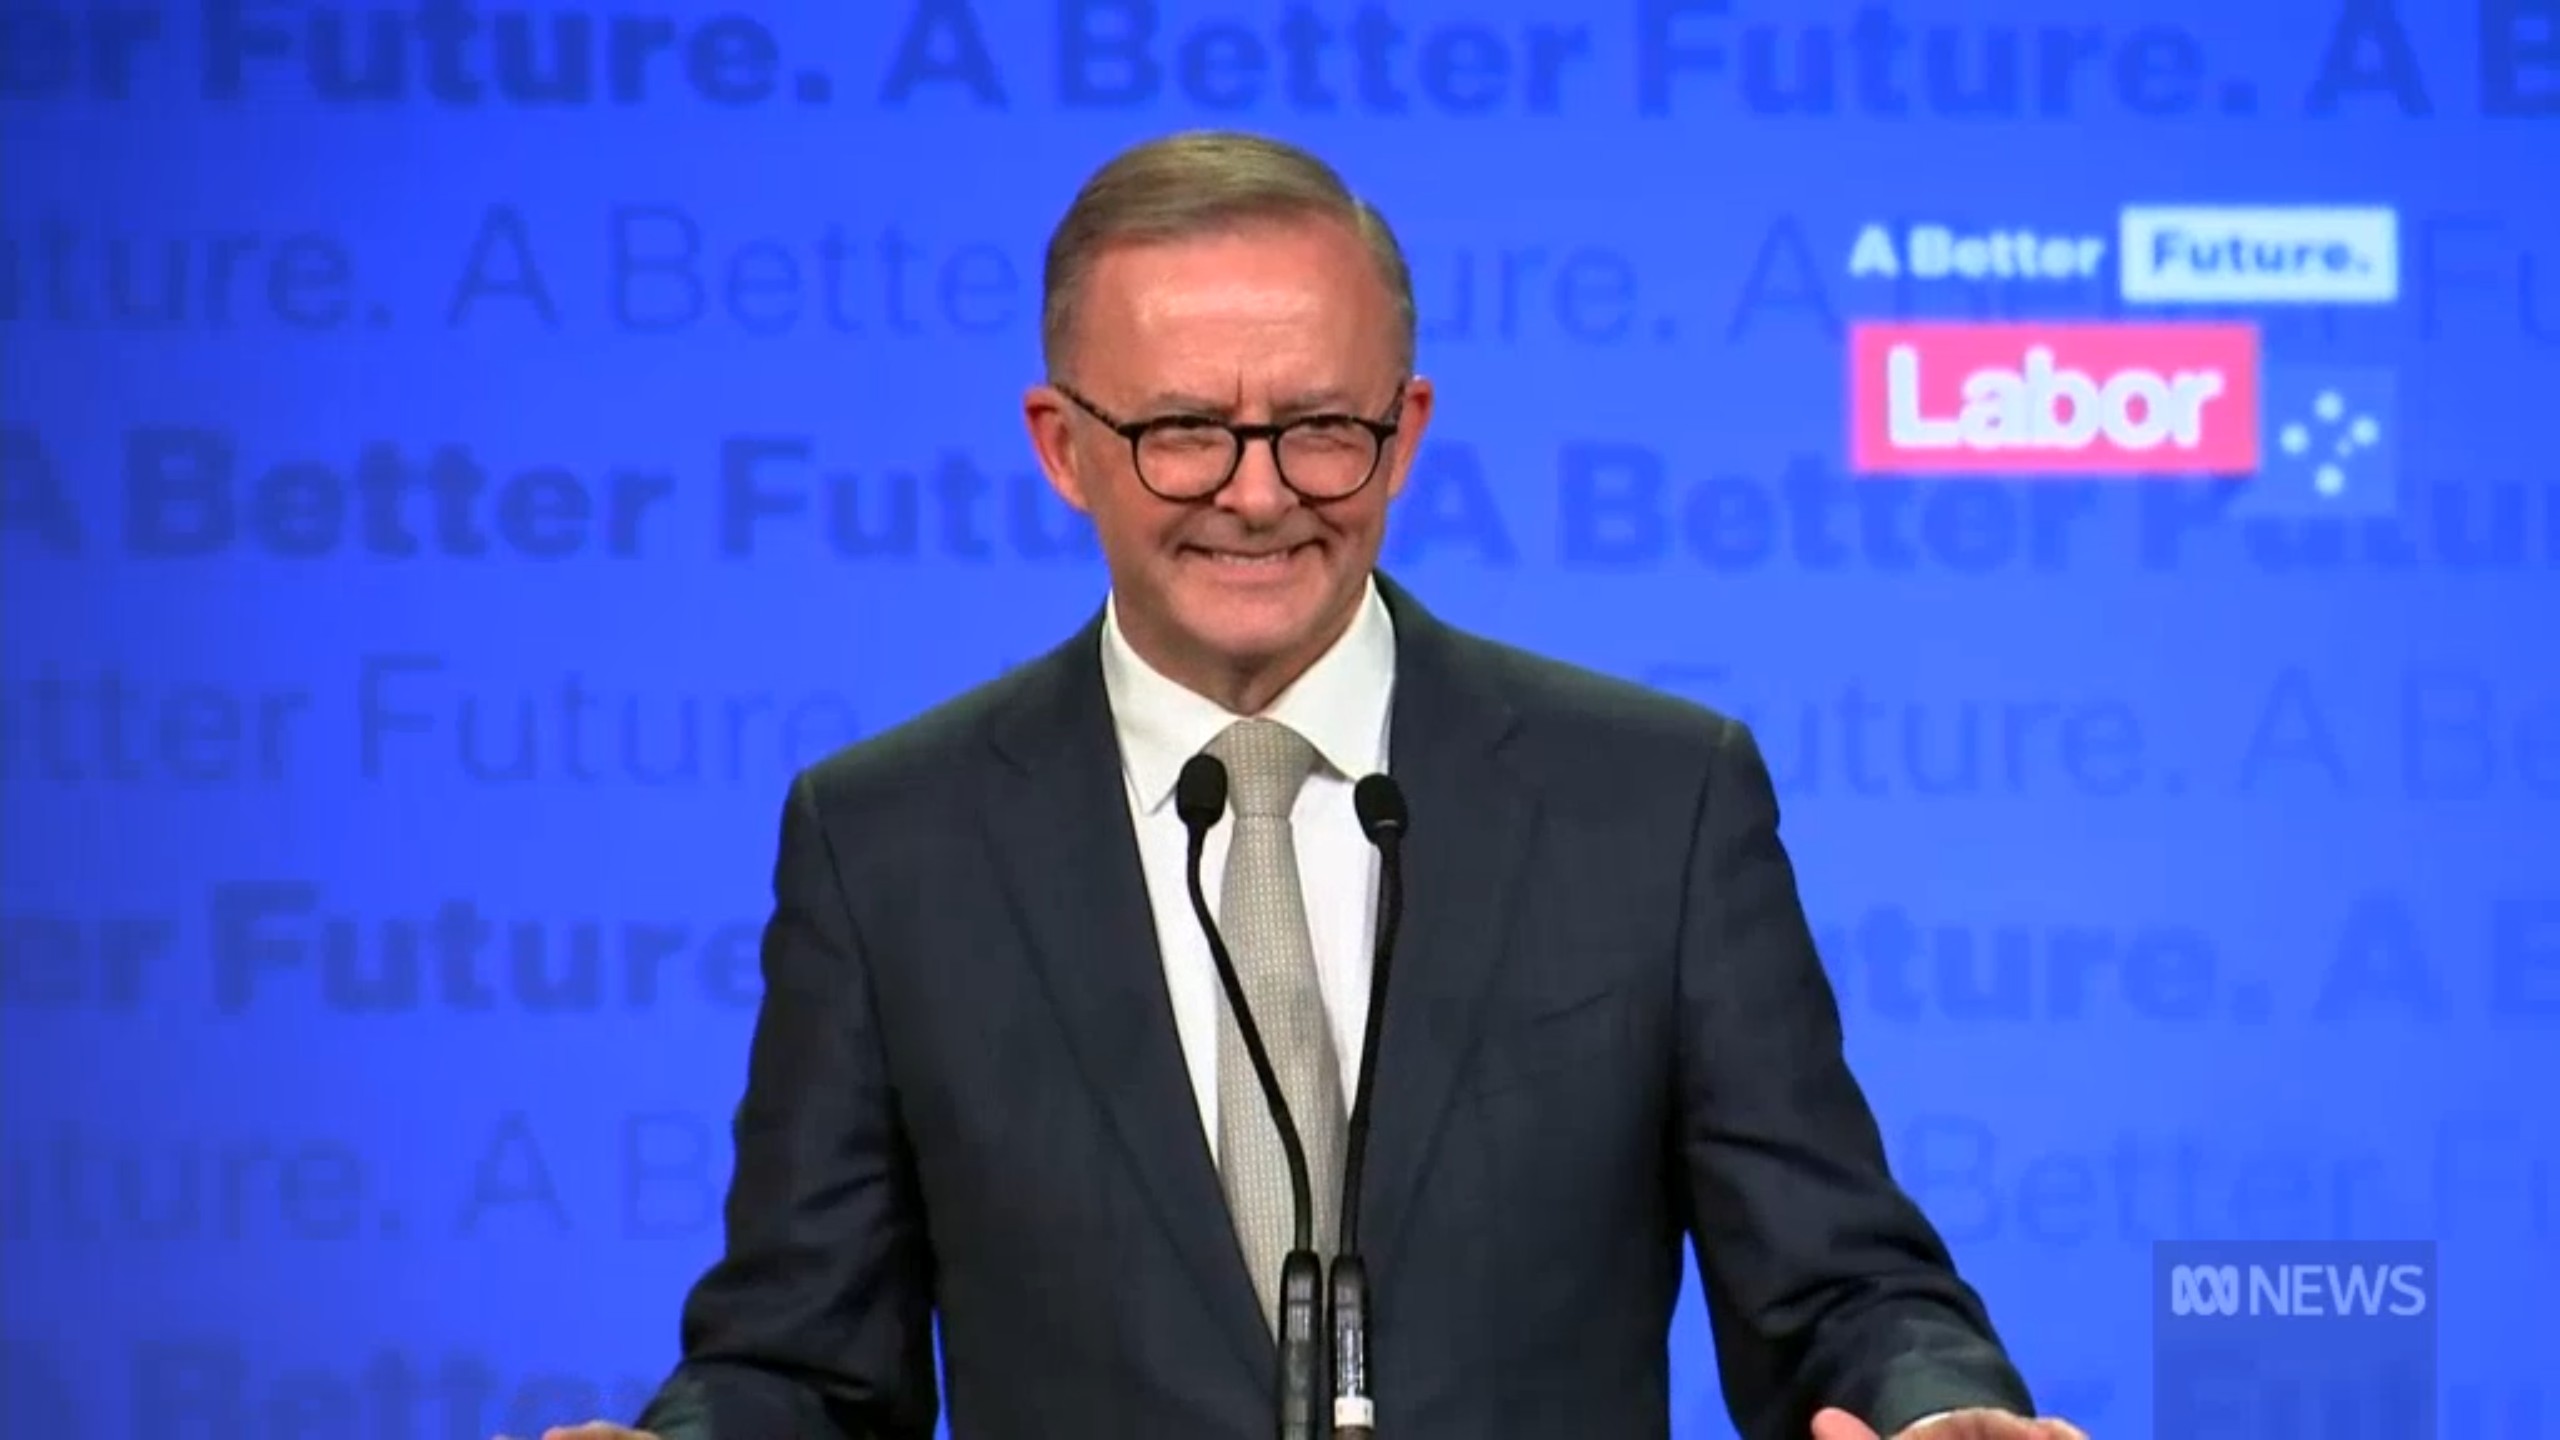 Incoming Prime Minister Anthony Albanese